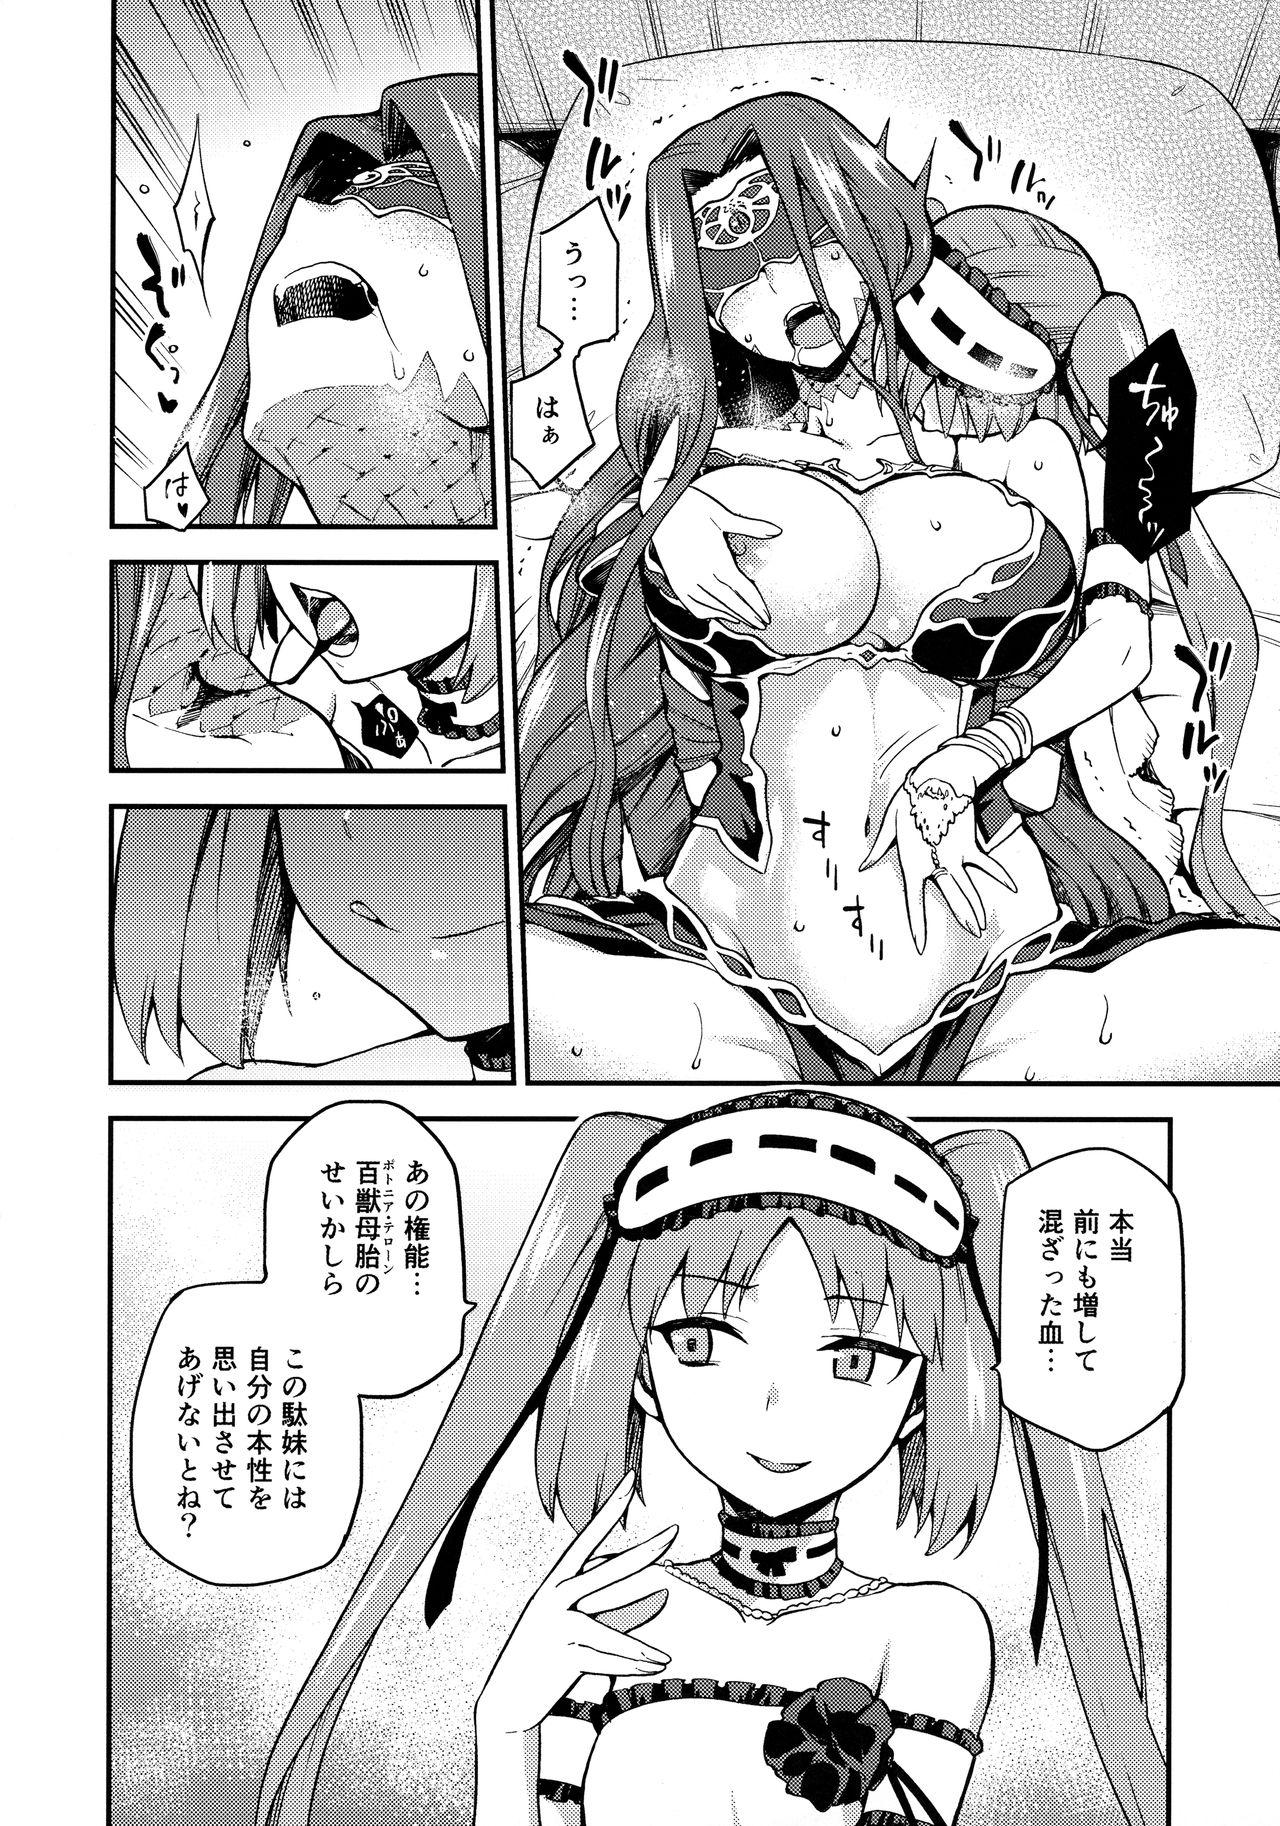 Red Hebigami no Honnou - Fate grand order Transexual - Page 7